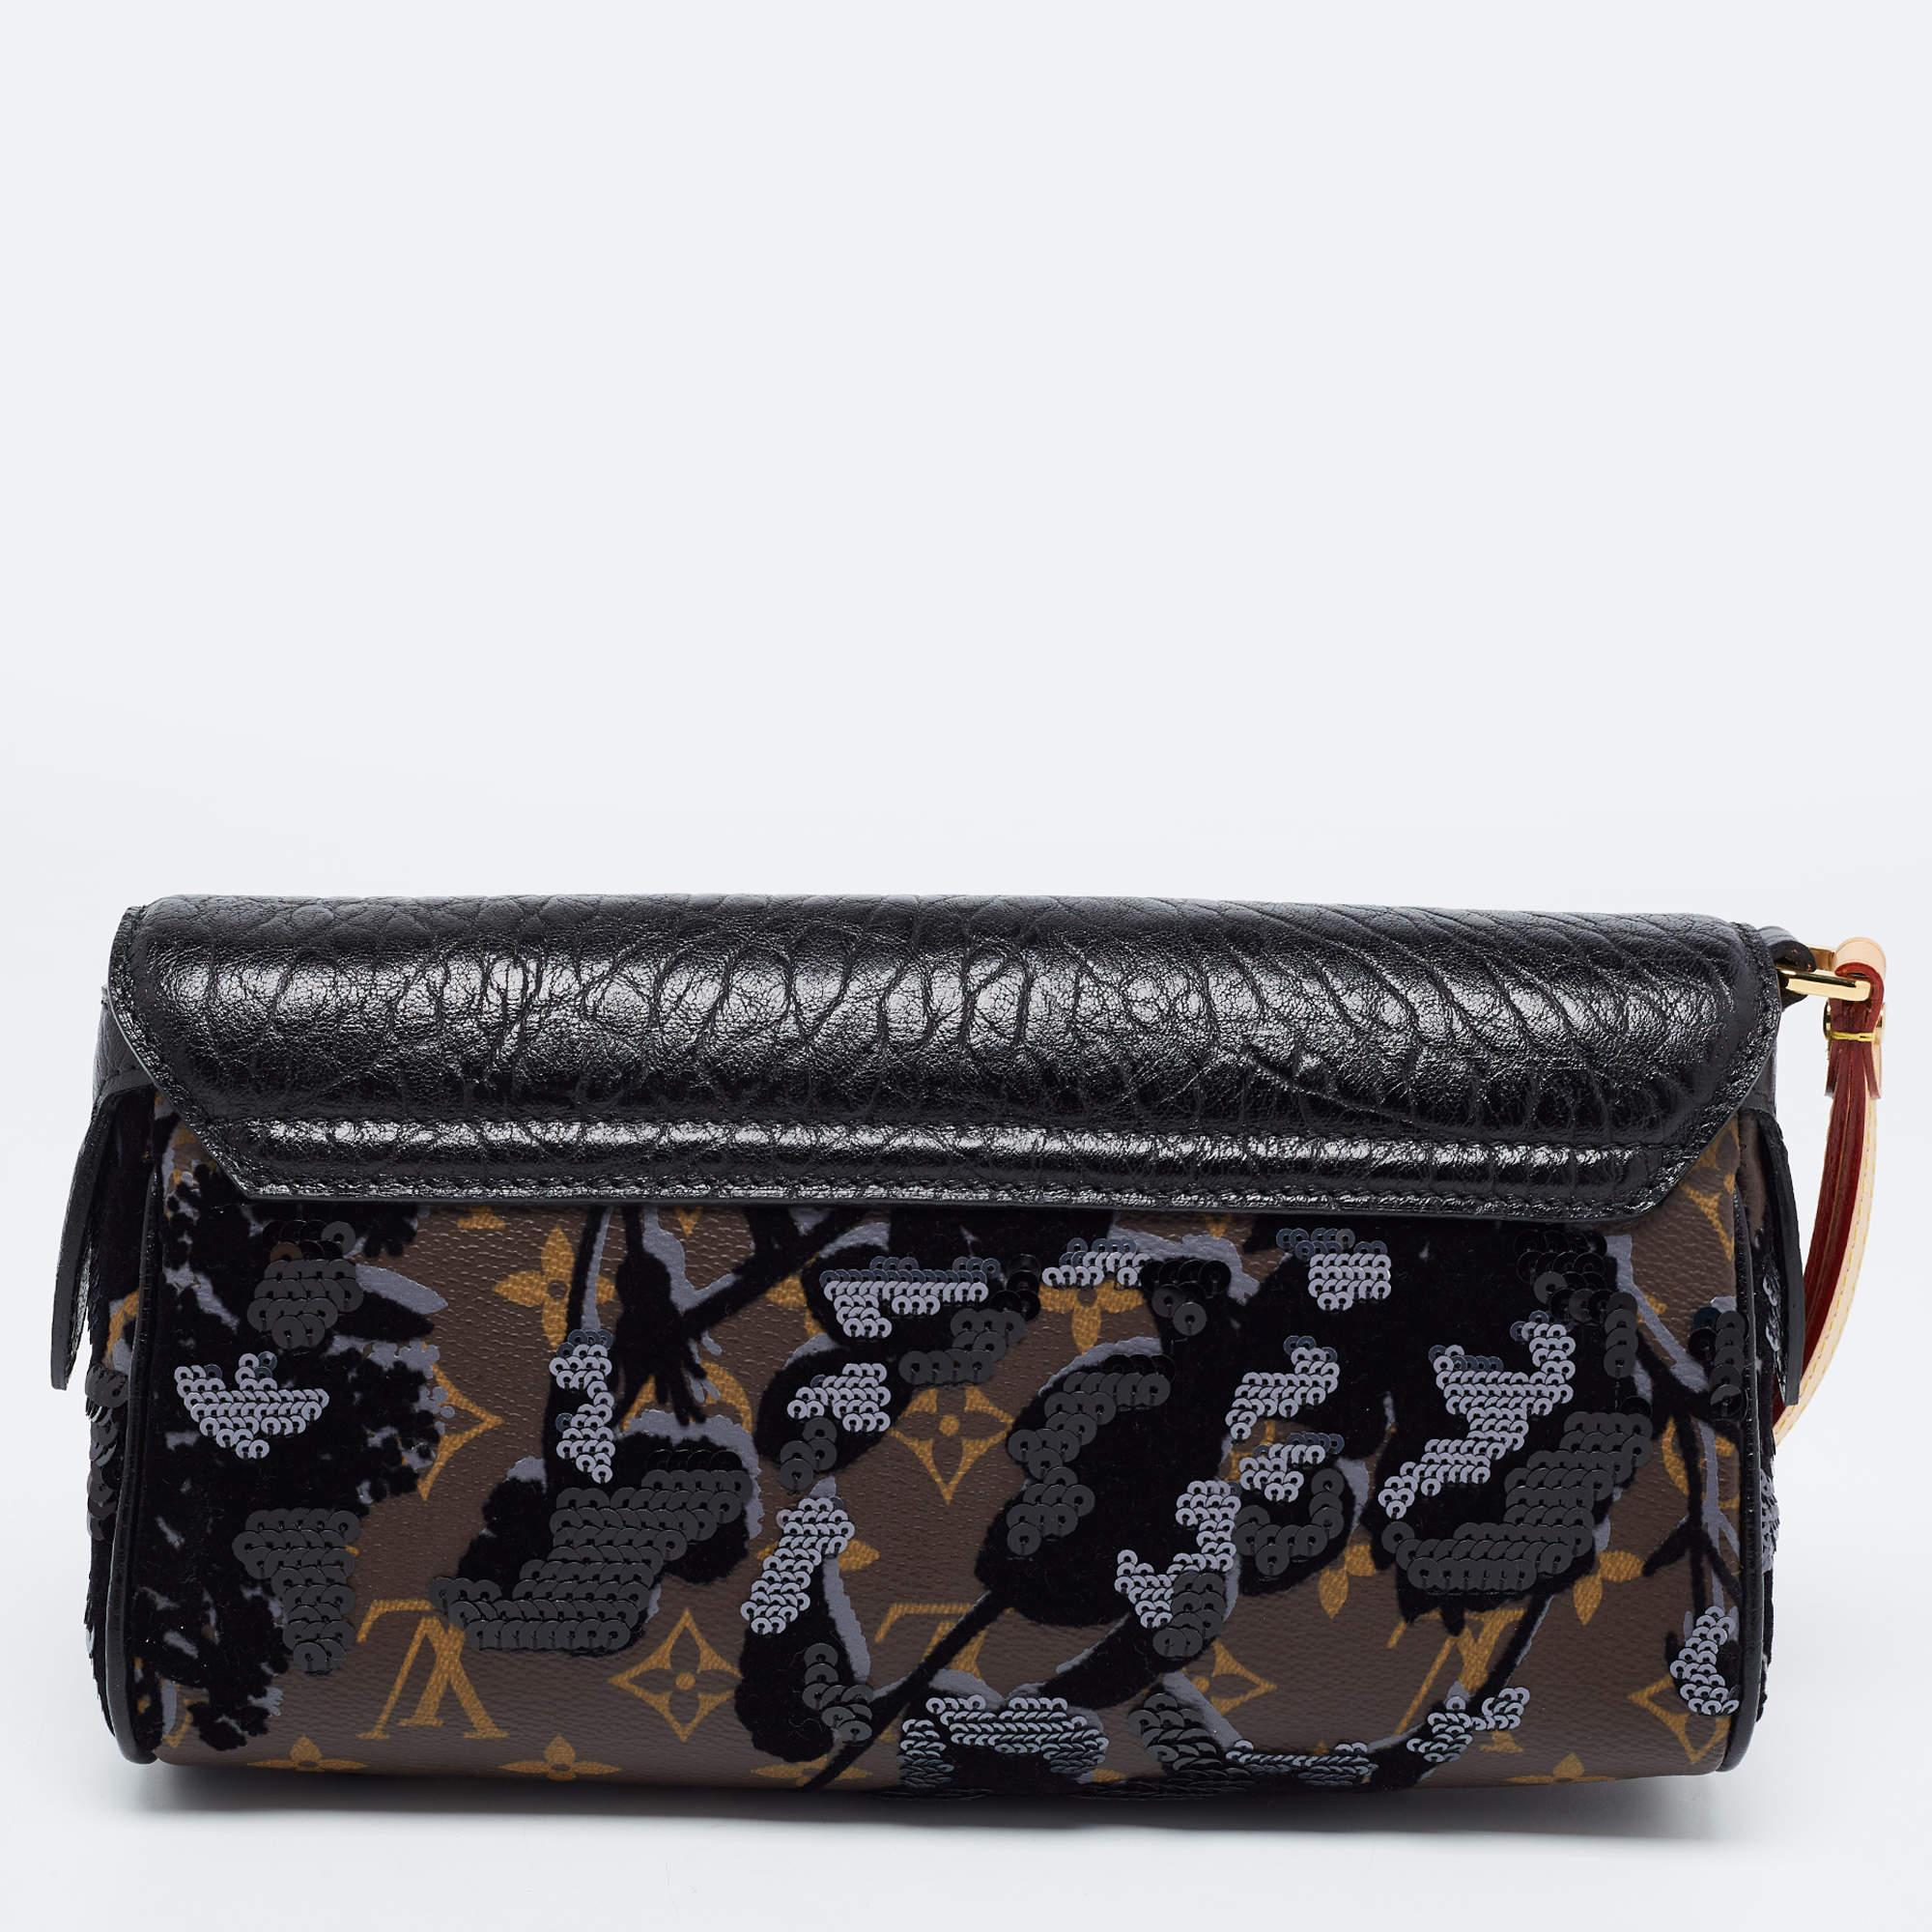 This Louis Vuitton Limited Edition Fleur de Jais Manege clutch is packed with luxury and utility. Crafted using Monogram canvas and leather, this Fleur de Jais Manege LV clutch will keep your little essentials safe. It features a wristlet on the